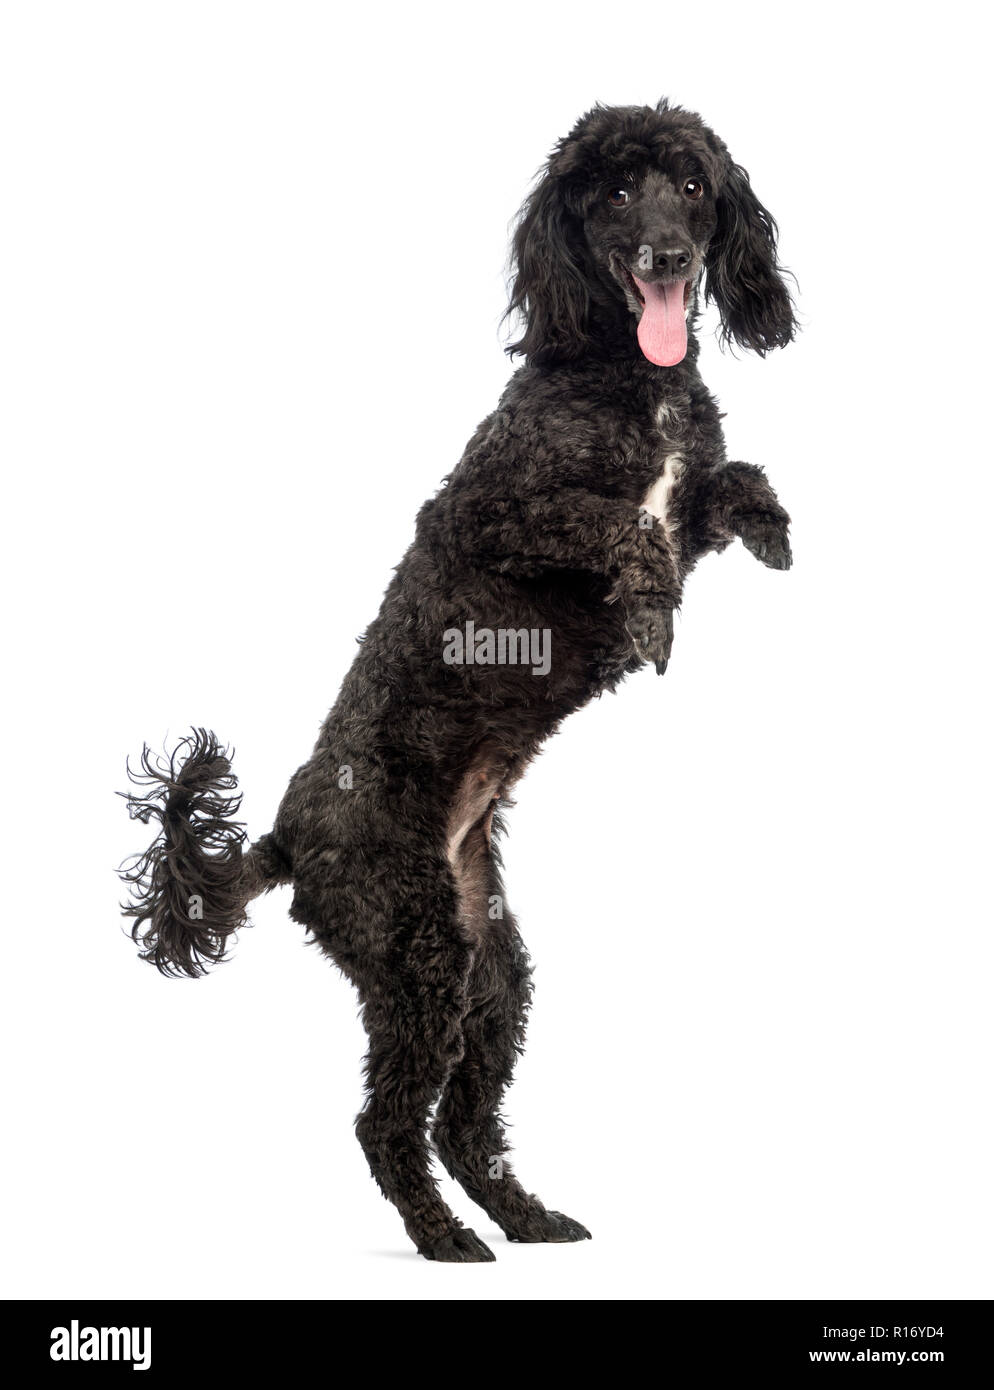 Poodle, 5 years old, in front of white background Stock Photo